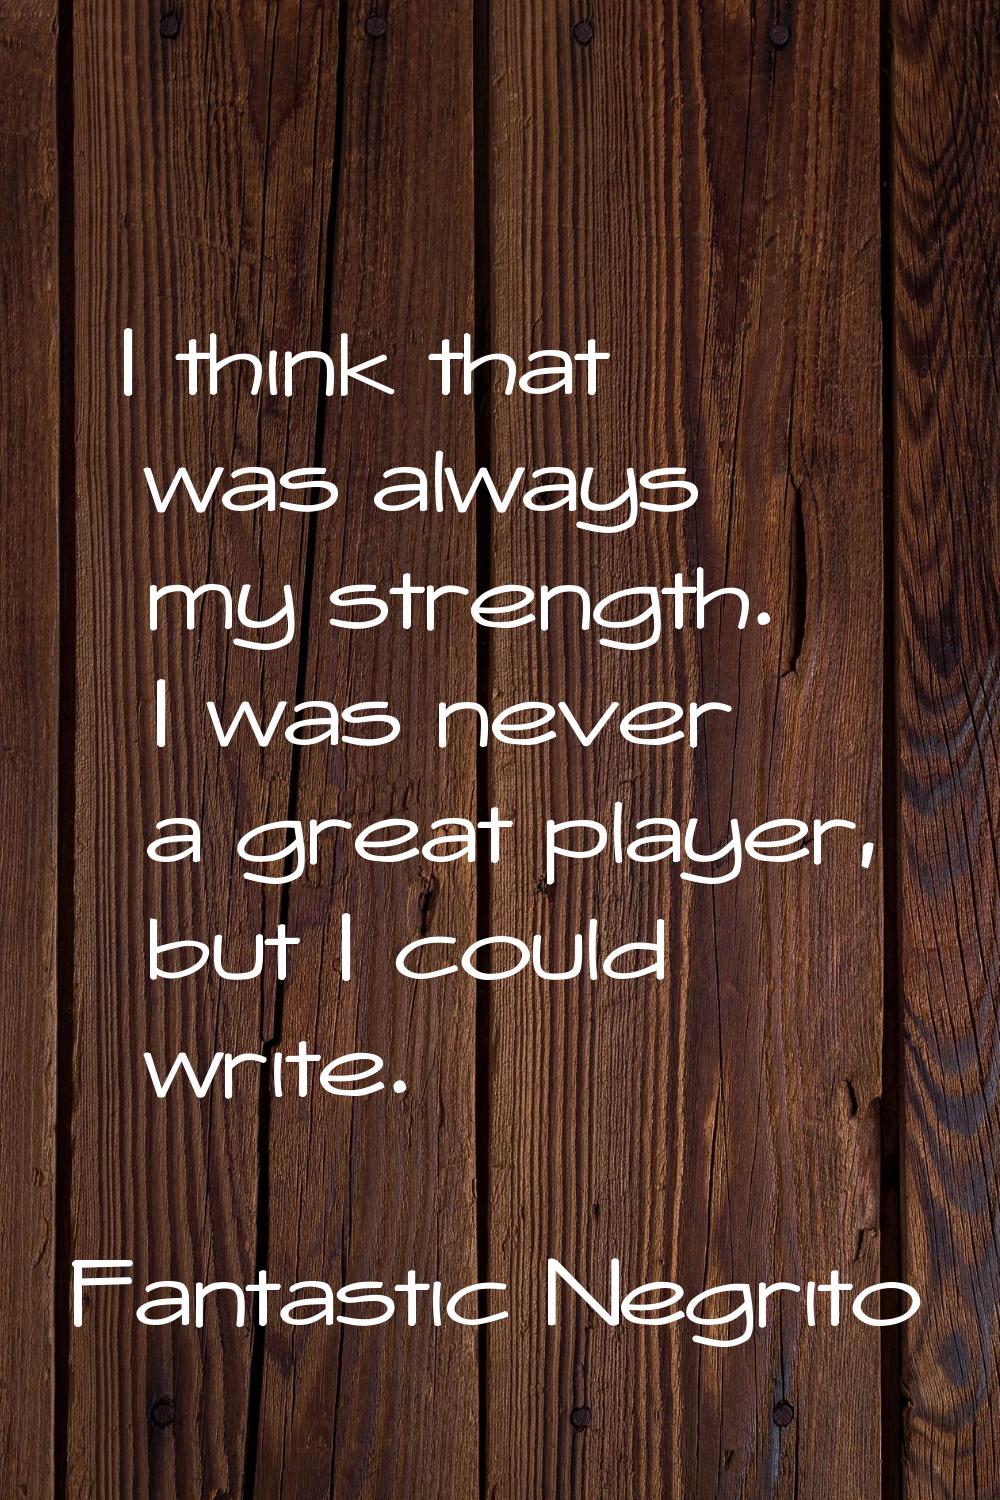 I think that was always my strength. I was never a great player, but I could write.